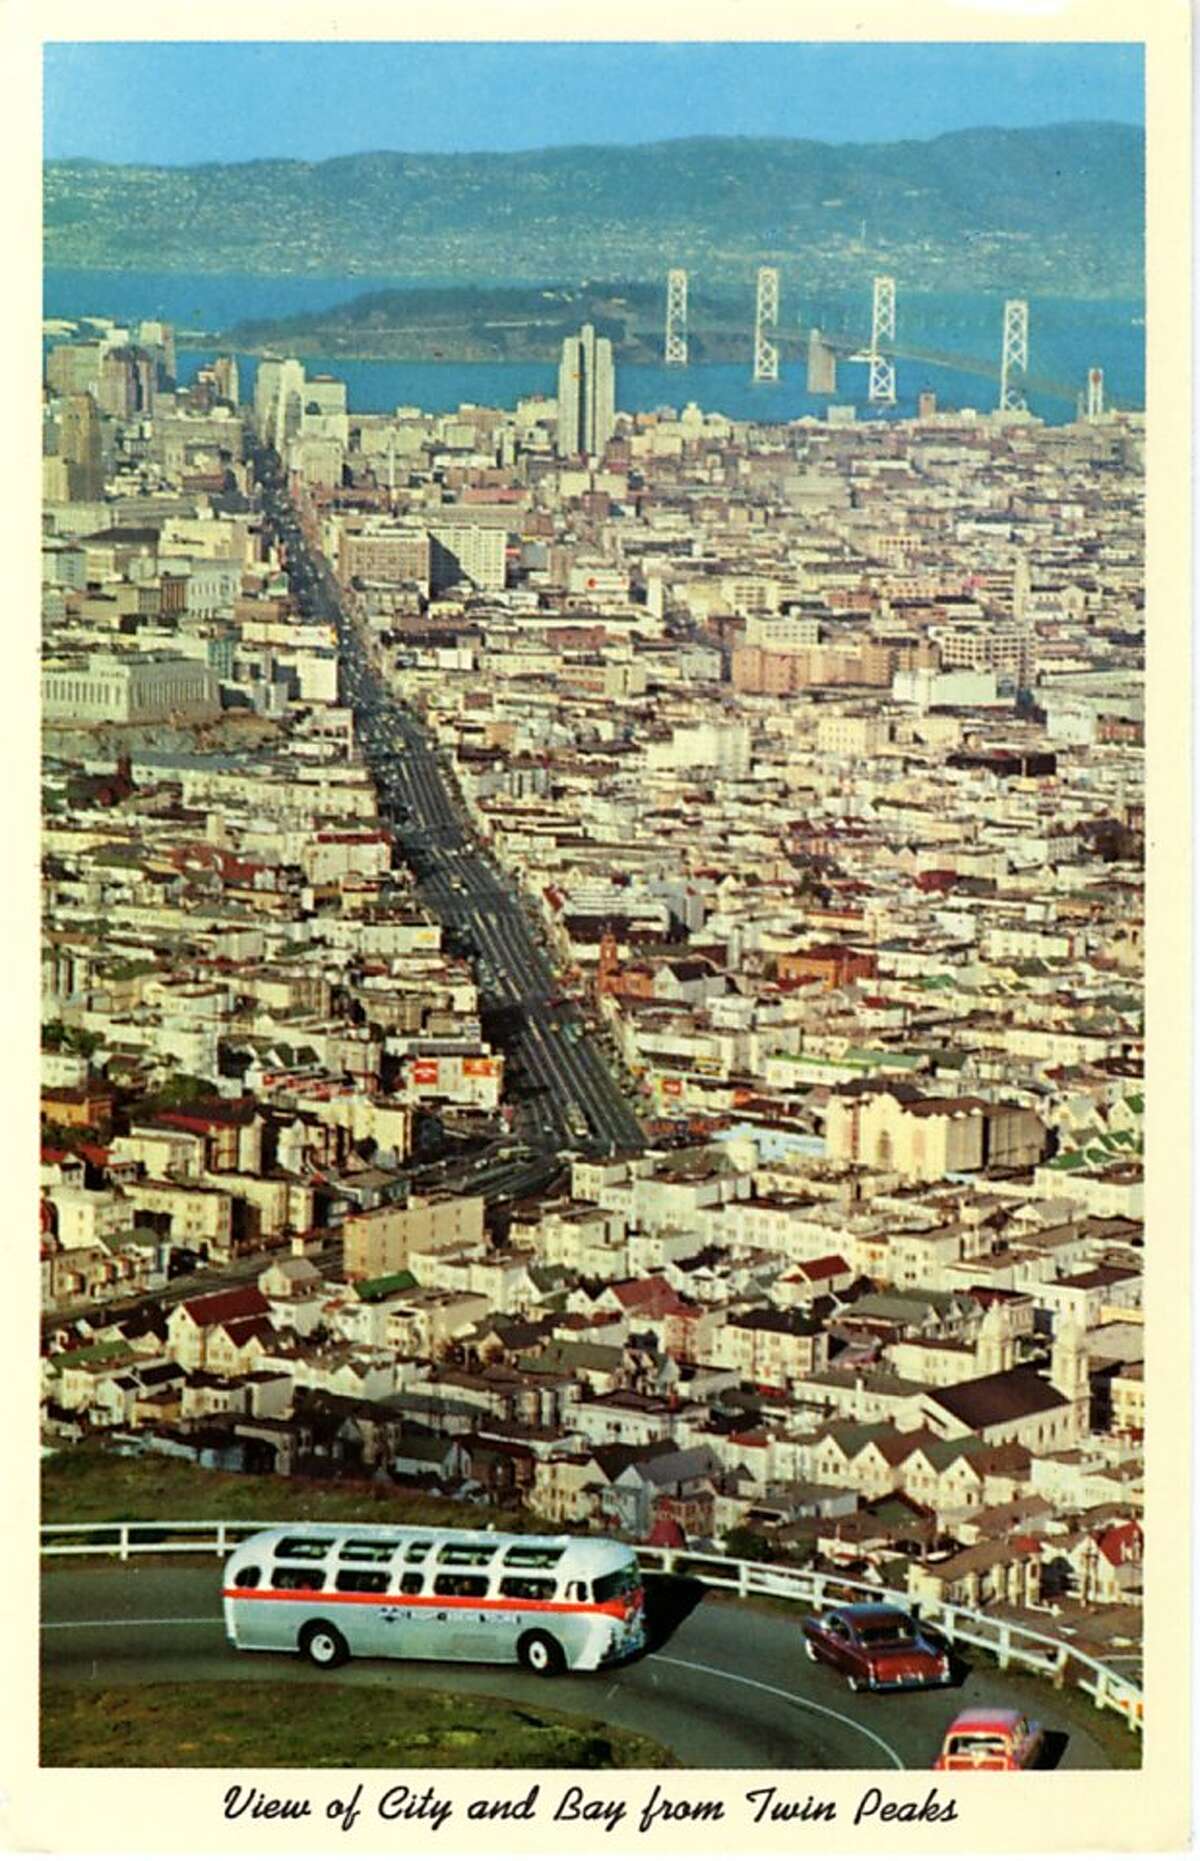 Vintage postcard showing a bird's eye view of San Francisco and the Bay. The San Francisco-Oakland Bay Bridge is visible in the distance.